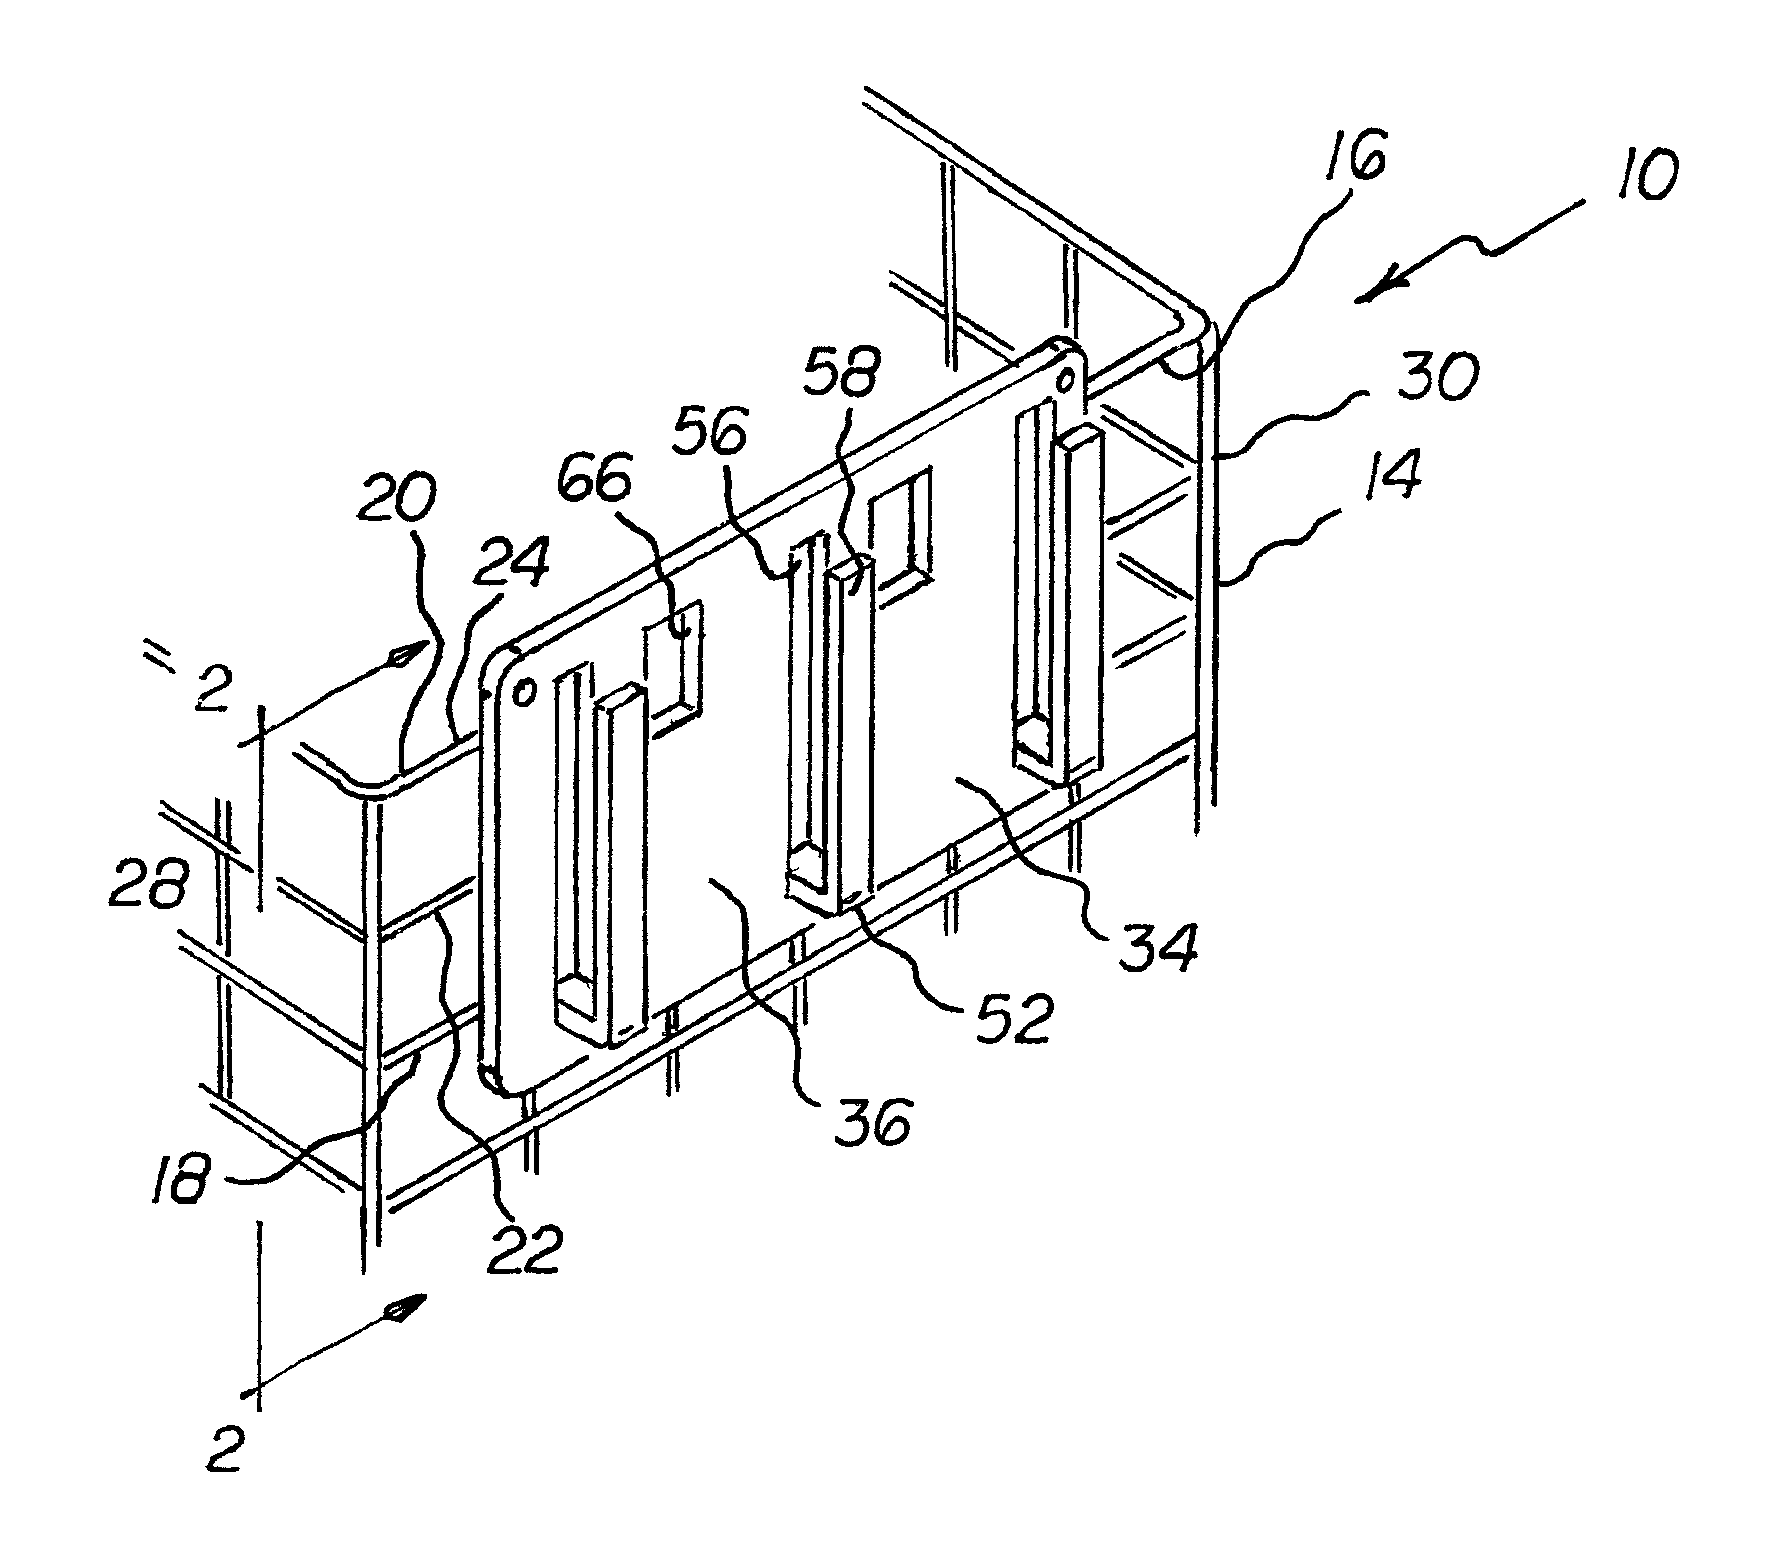 Product promotion storage rack and caddy system